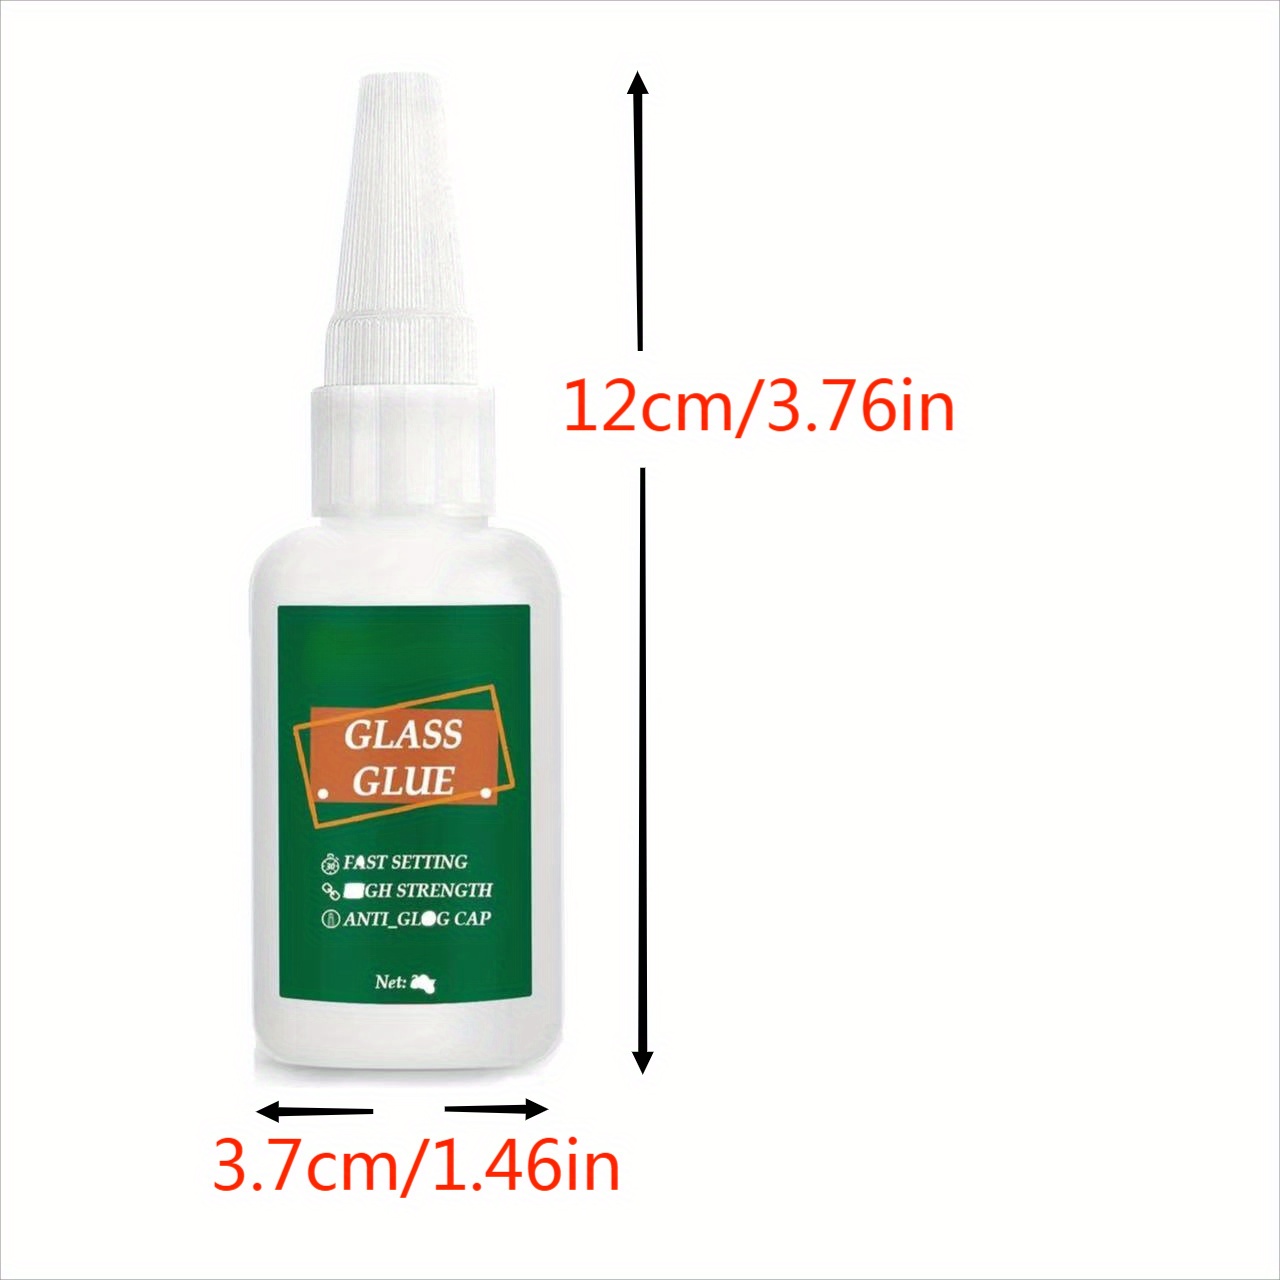 Glass Glue, 30g Clear Waterproof Acrylic Glue, Glass to Glass Glue for  Bonding Glass.Instant Super Glue for Glass,Acrylic,Glasses,Crystal,DIY